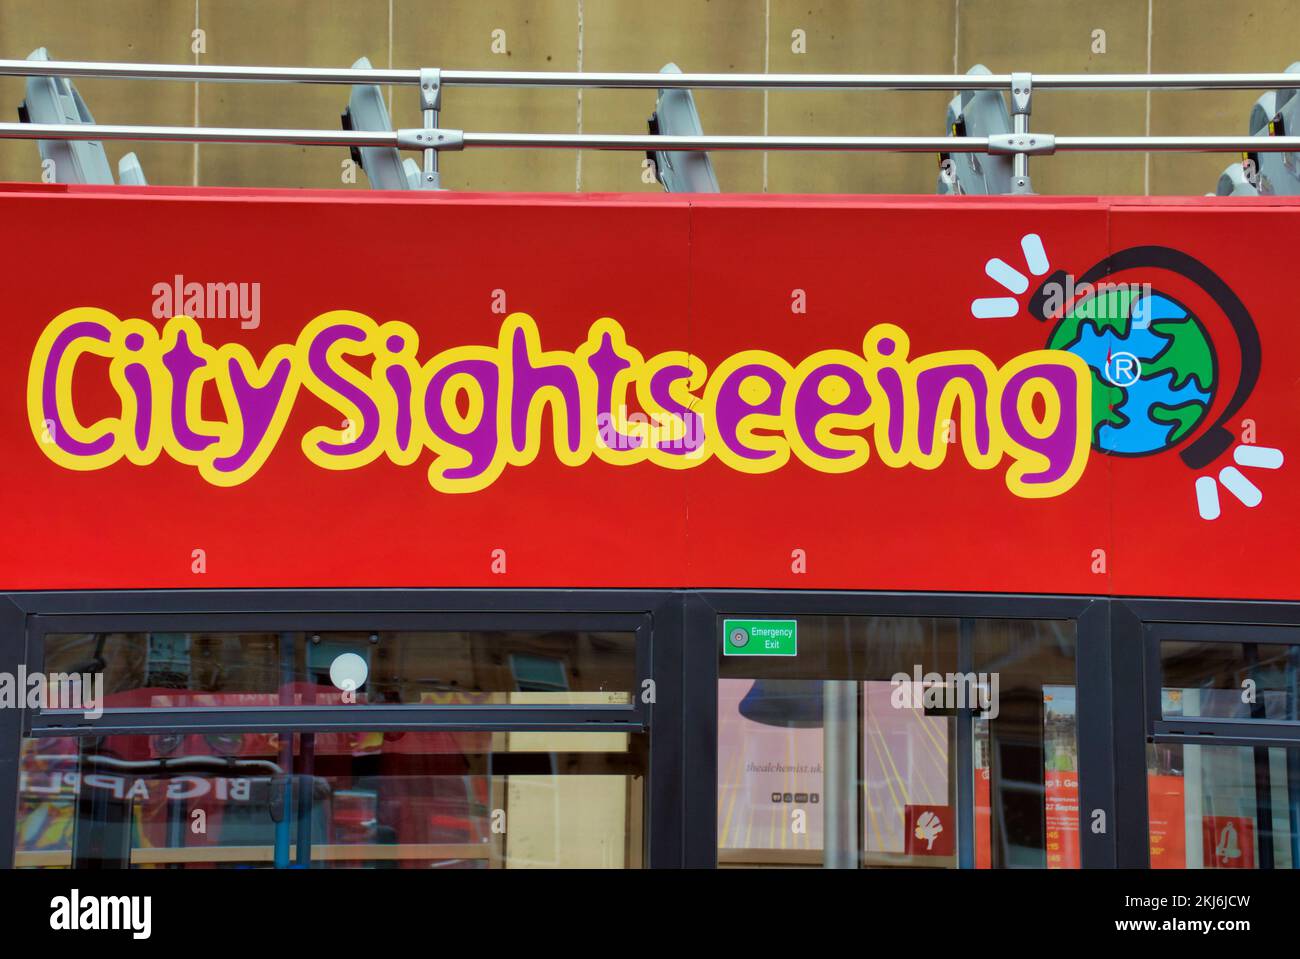 Glasgow city sightseeing bus sign close up Stock Photo